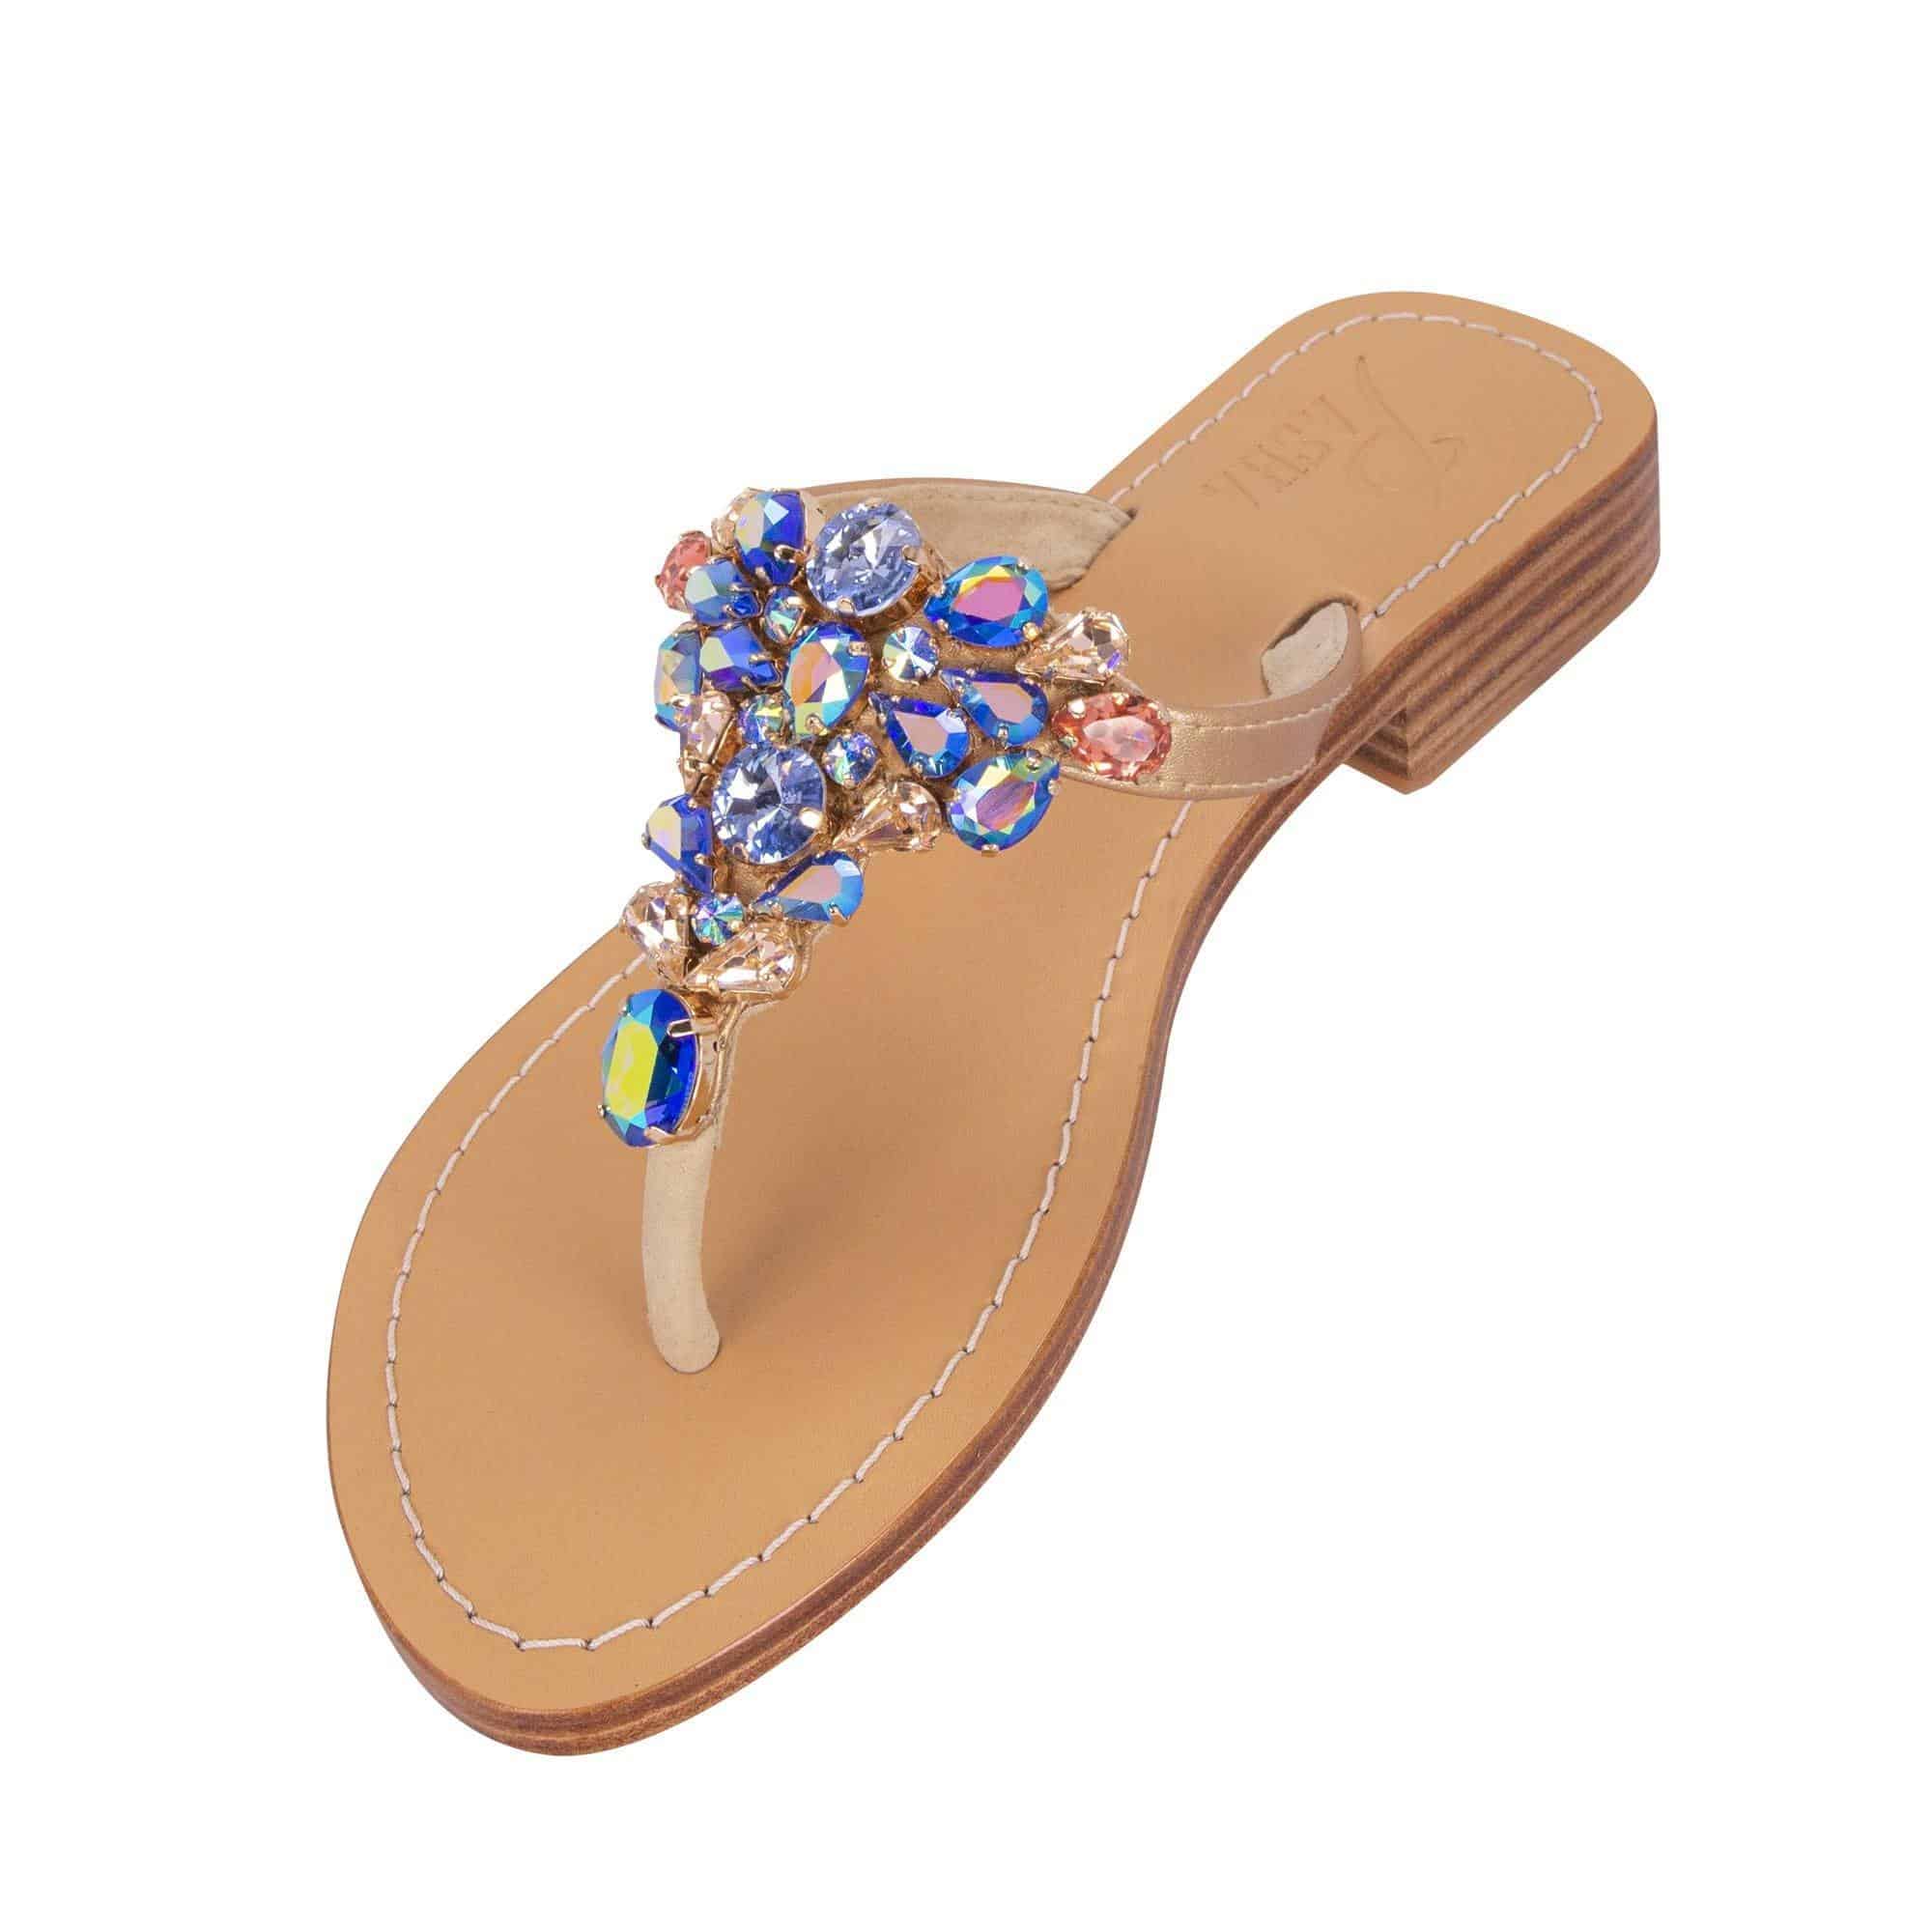 FRISCO - Pasha - Jewelry for your feet